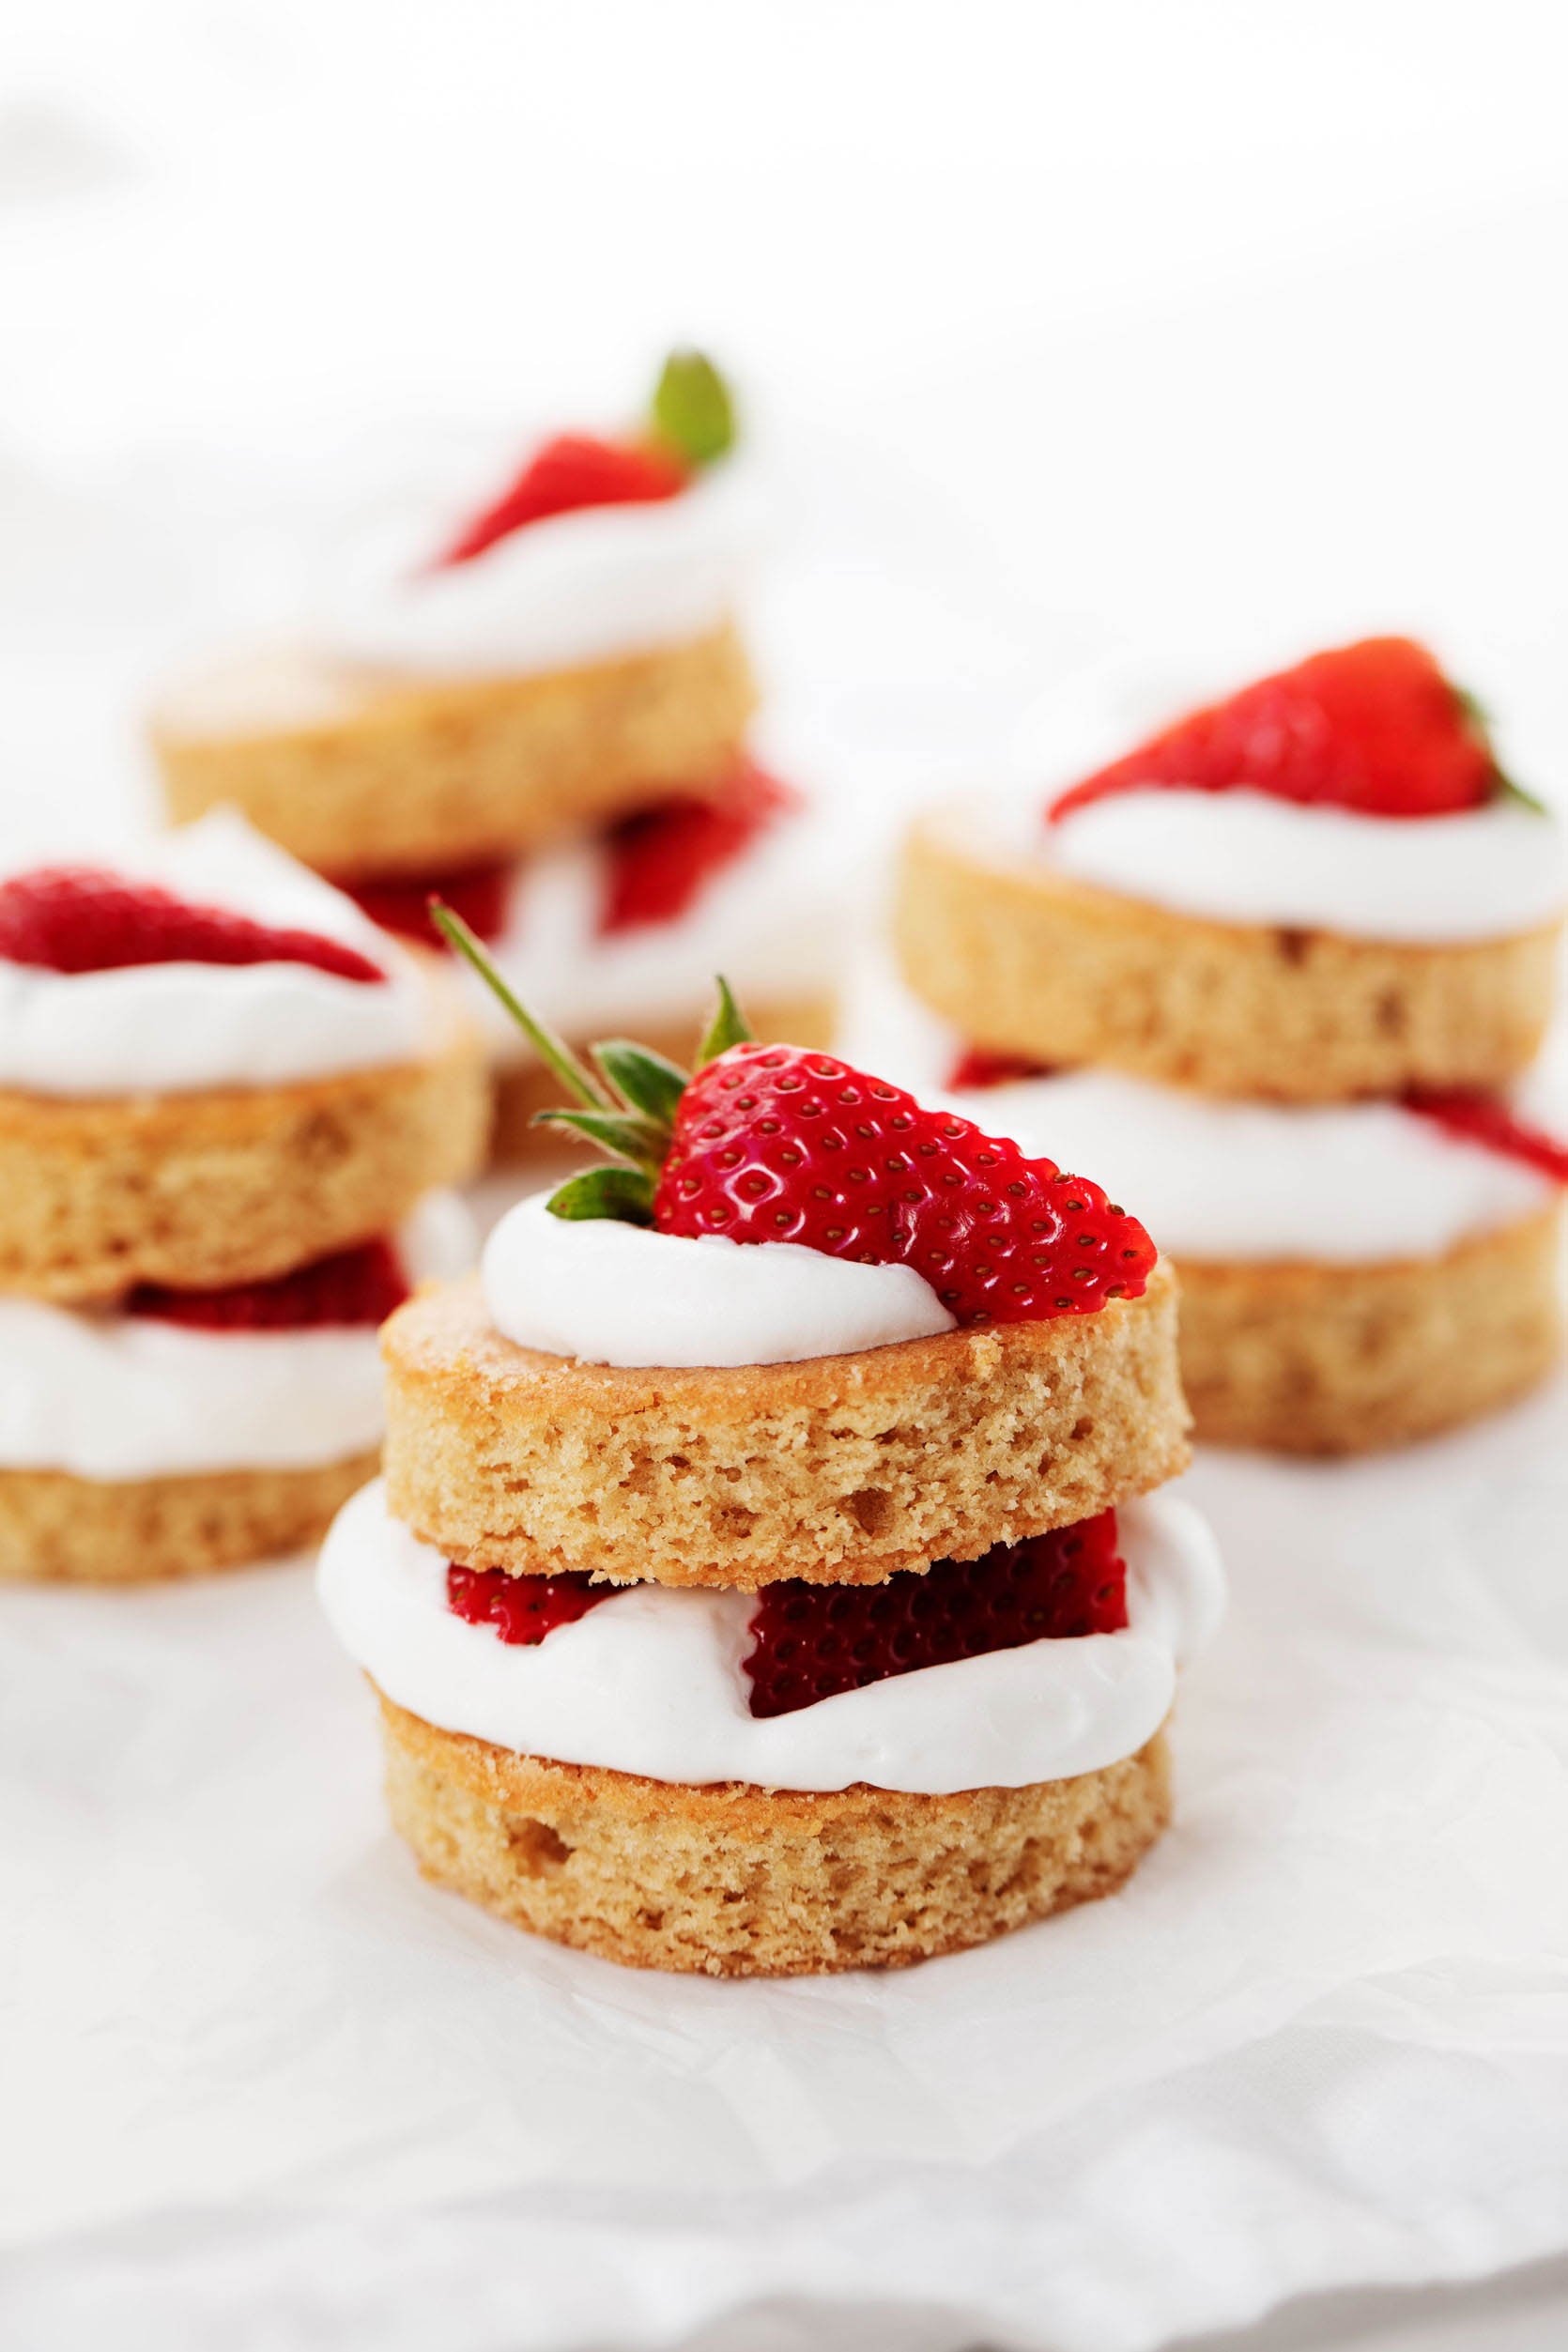 Four stacks of vegan strawberry shortcake are lined up on a sheet of white parchment paper.